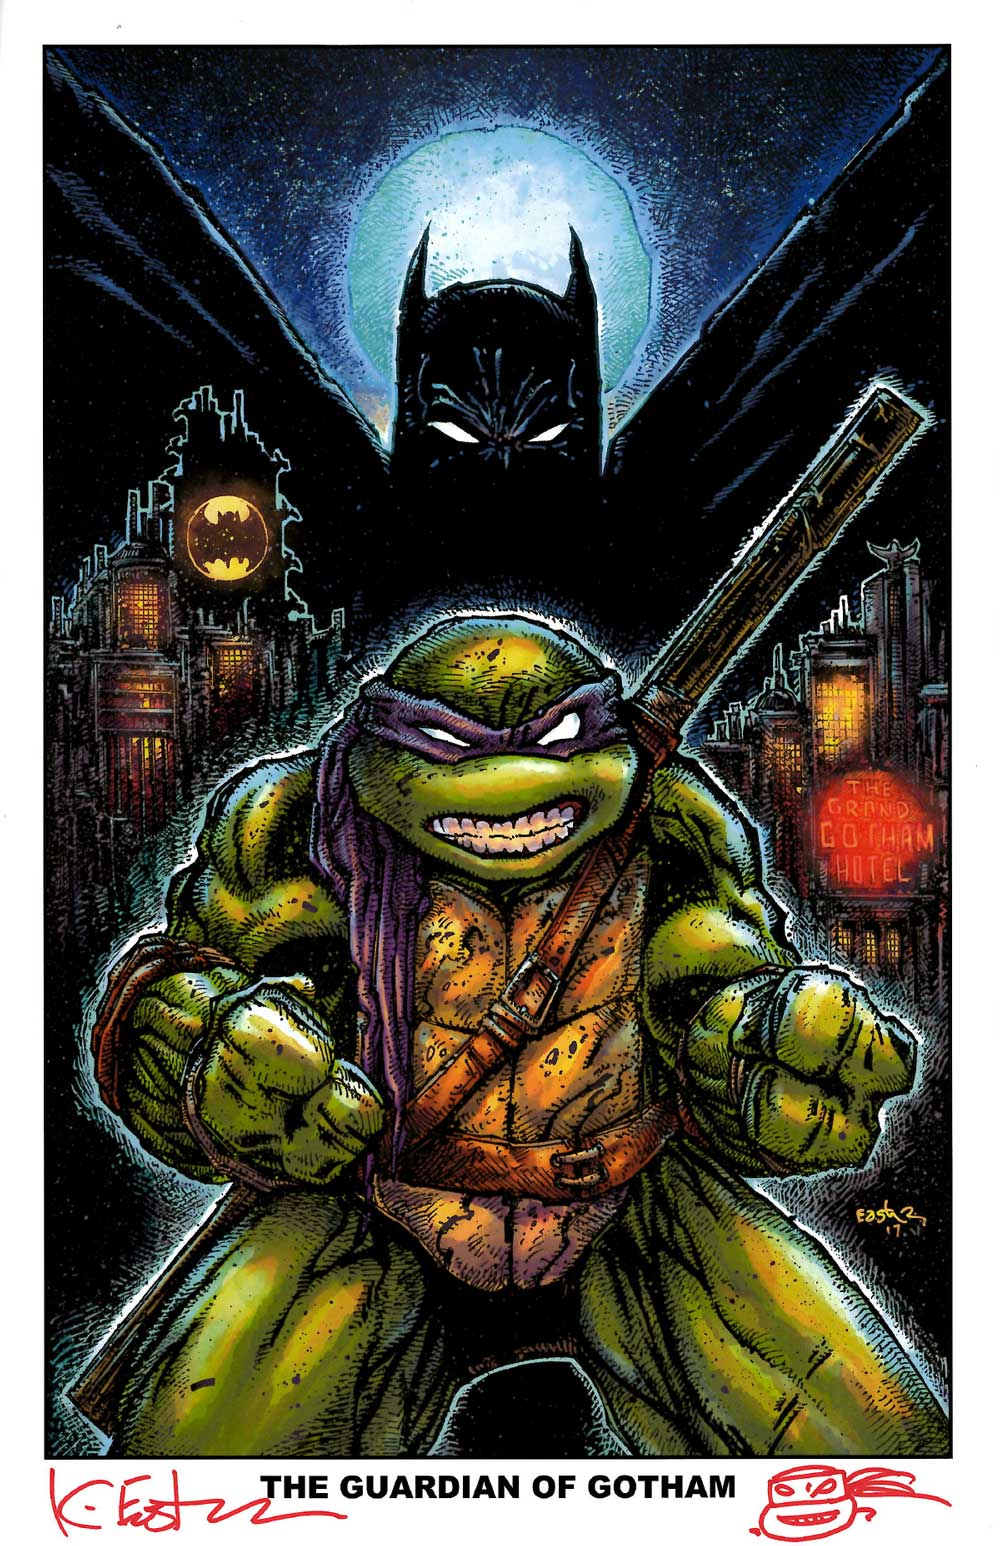 The Guardian Of Gotham – Signed Print